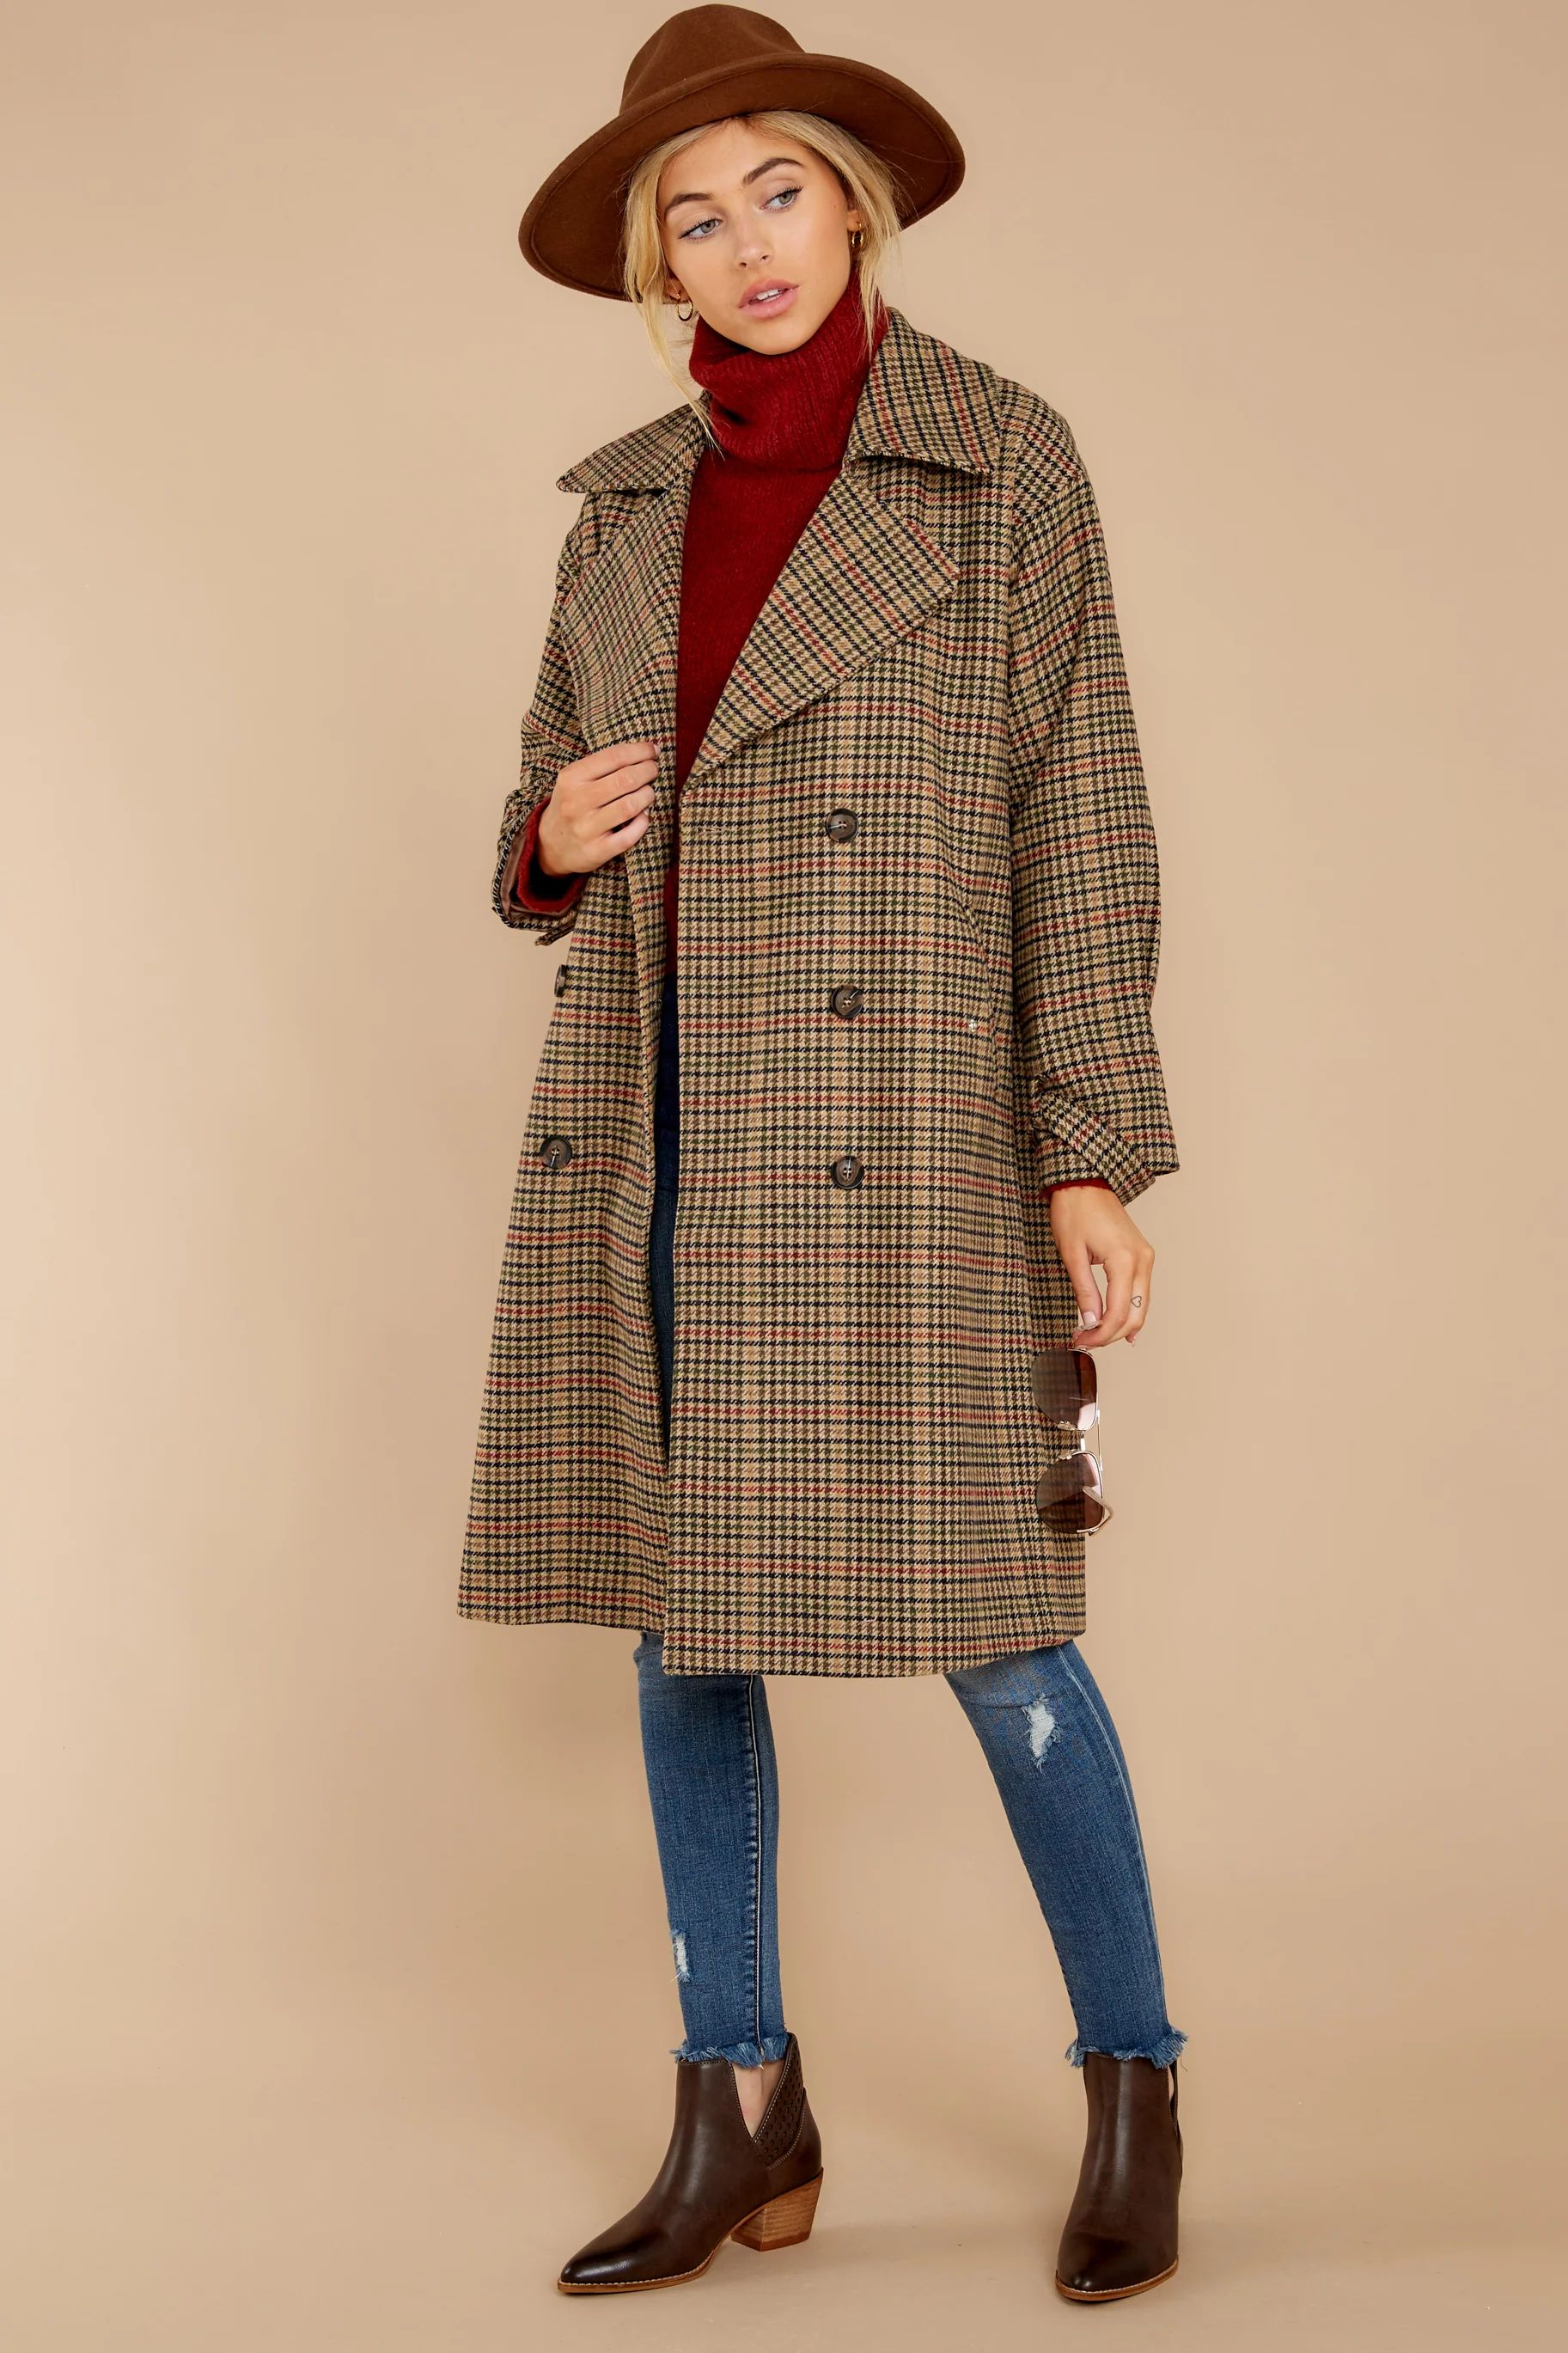 Notting Hill Brown Plaid Coat | Red Dress 